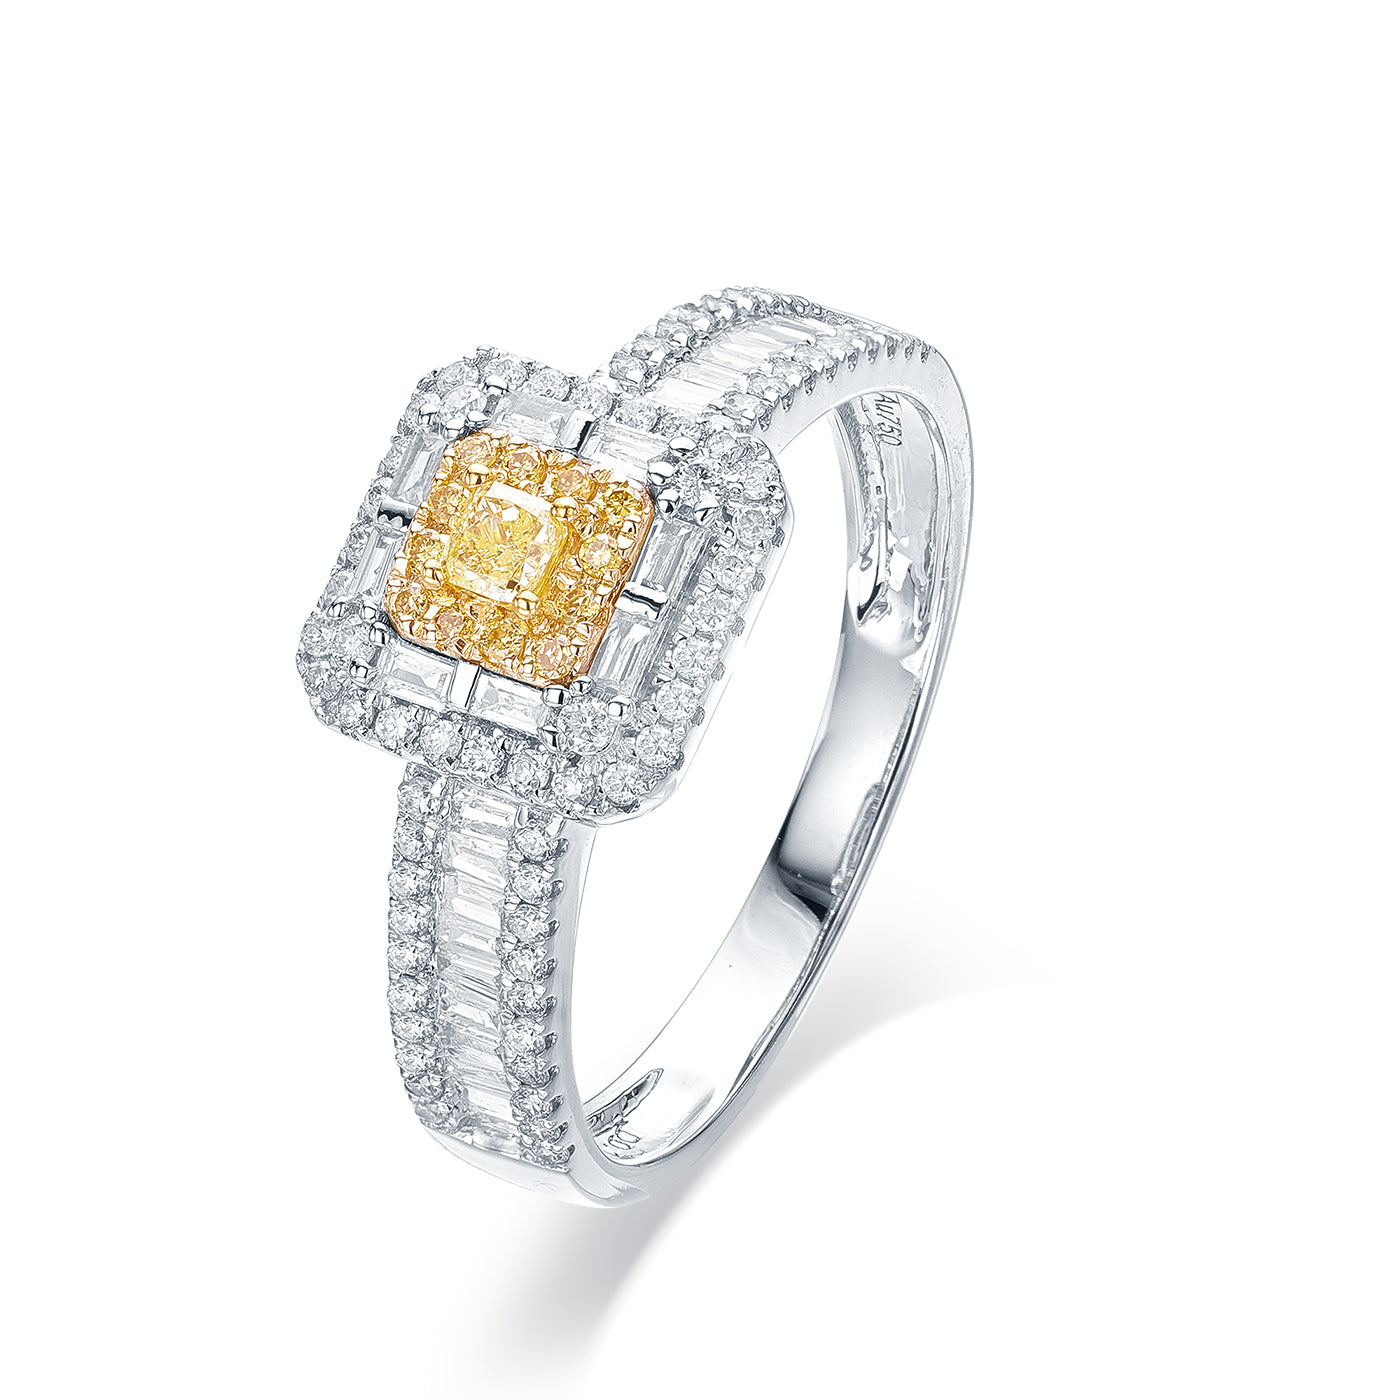 Natural Yellow Diamond Ring, 18K White Gold+Authentic Diamonds (side stones), Anniversary Gifts, Rings For Women, Diamond Ring